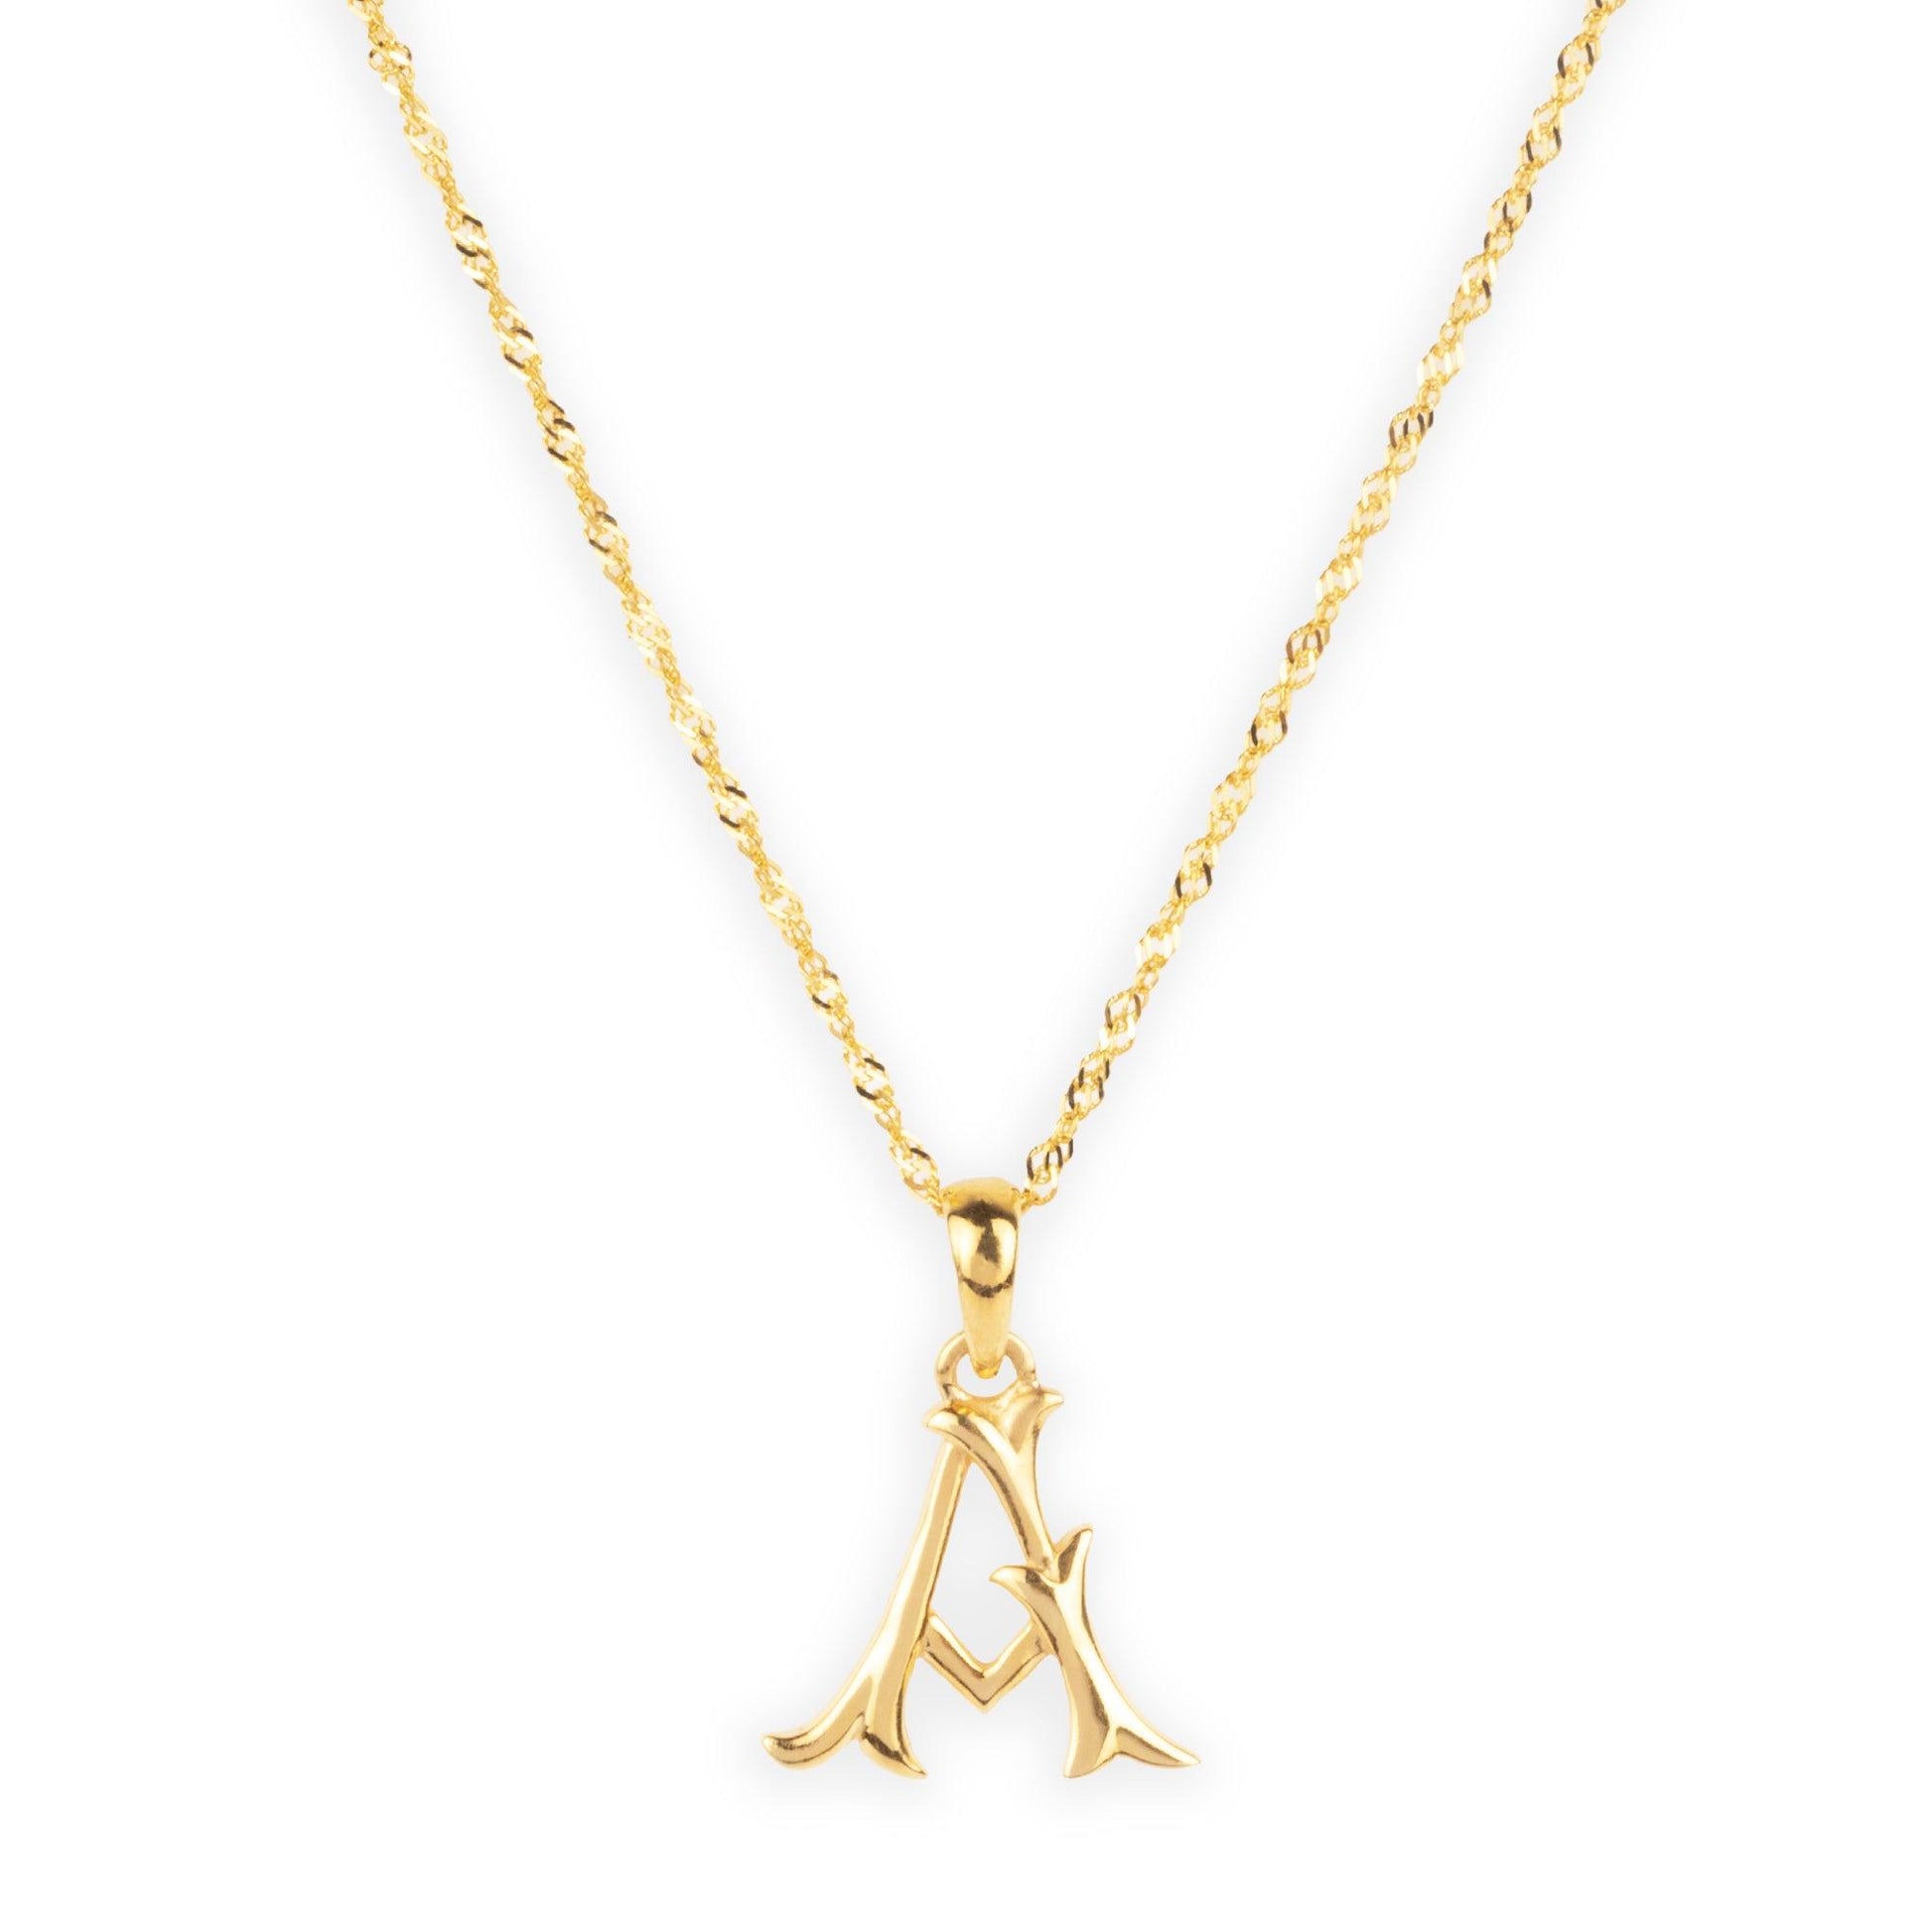 'A' 22ct Gold Initial Pendant P-7036 - Minar Jewellers